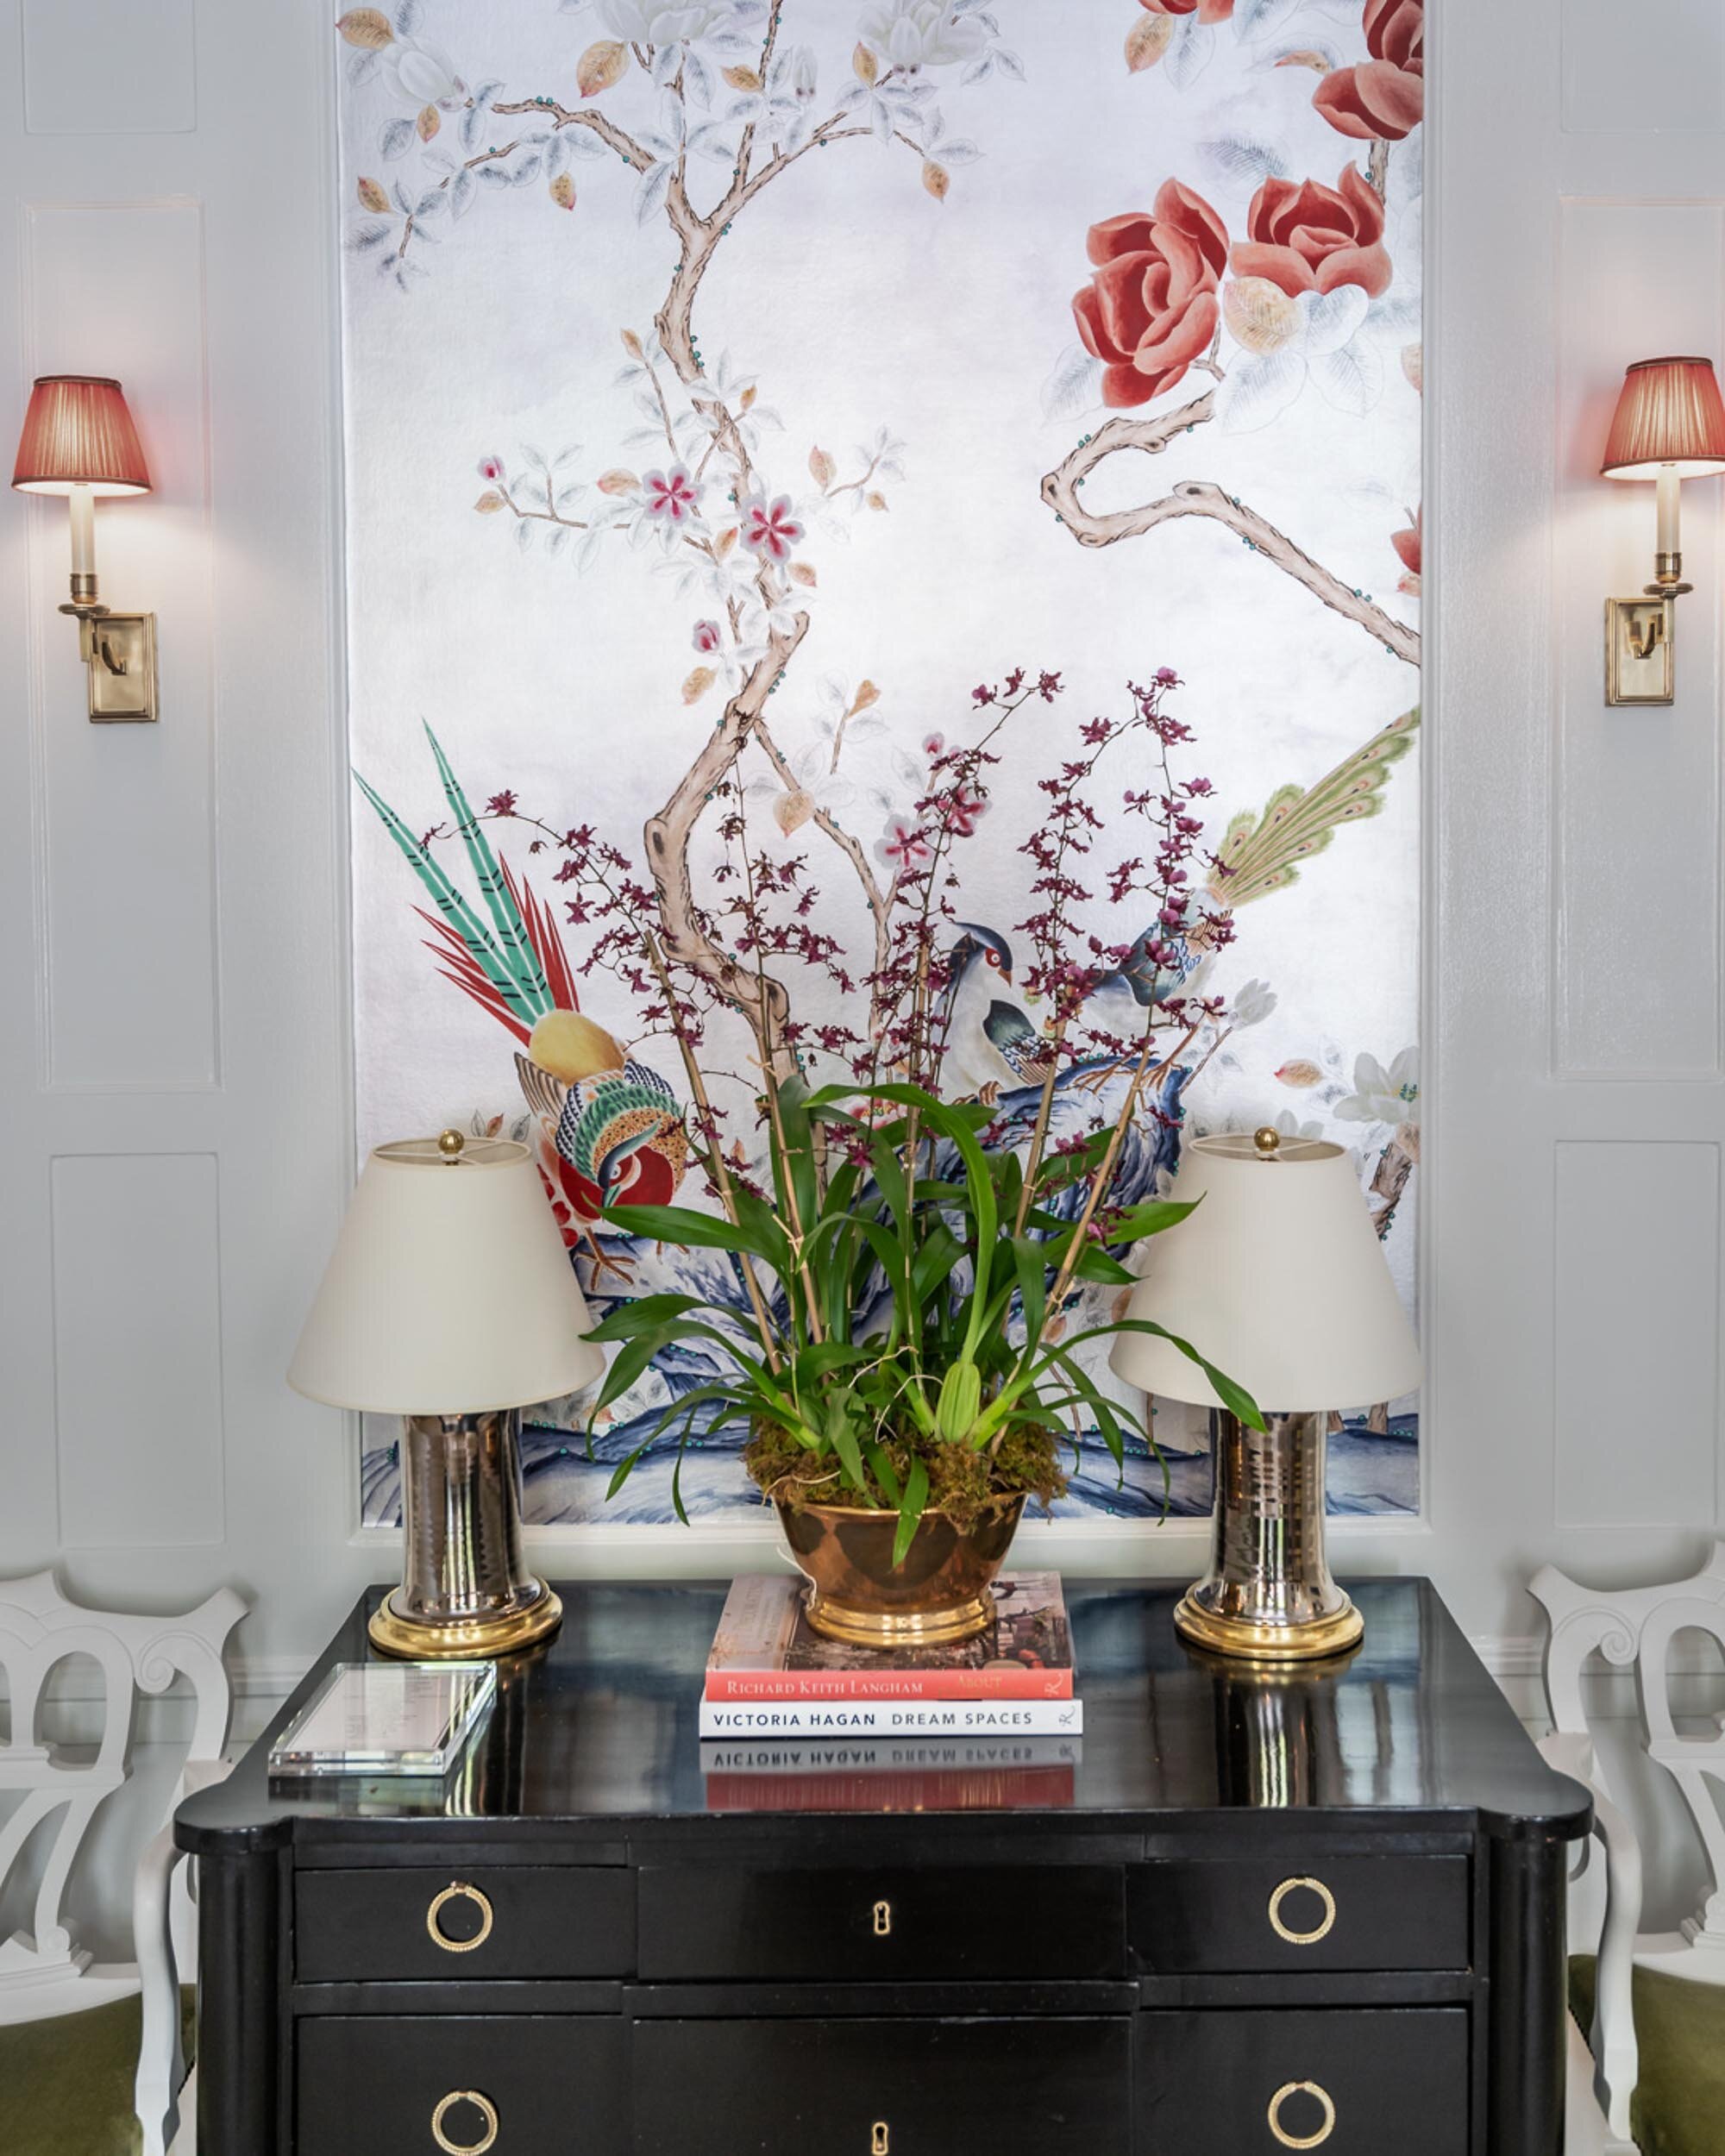  #bradsteinphoto, Highlights from the #kipsbayshowhouse19 Paloma Contreras study picks up on the existing architectural details of built-in bookcases. Against a mainly white background — relieved by some de Gournay Japanism here and there —  The uncl